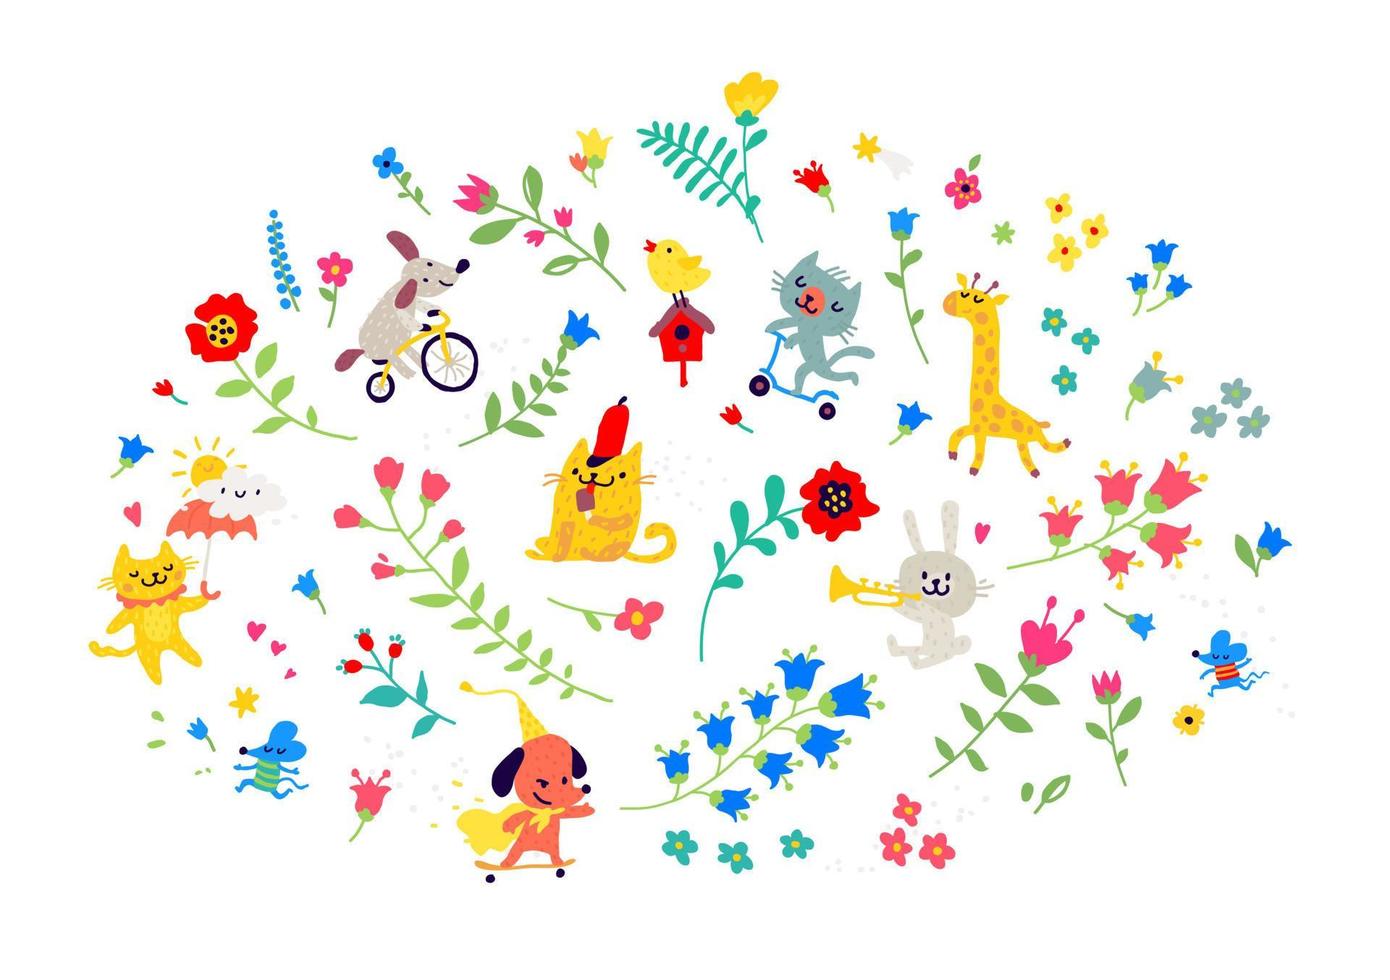 Illustration of a pattern of flowers and funny animals. Vector. Cartoon style. Floral elements for cards or greetings. Children's cosmetics, clothing, club. Flower ornament. vector